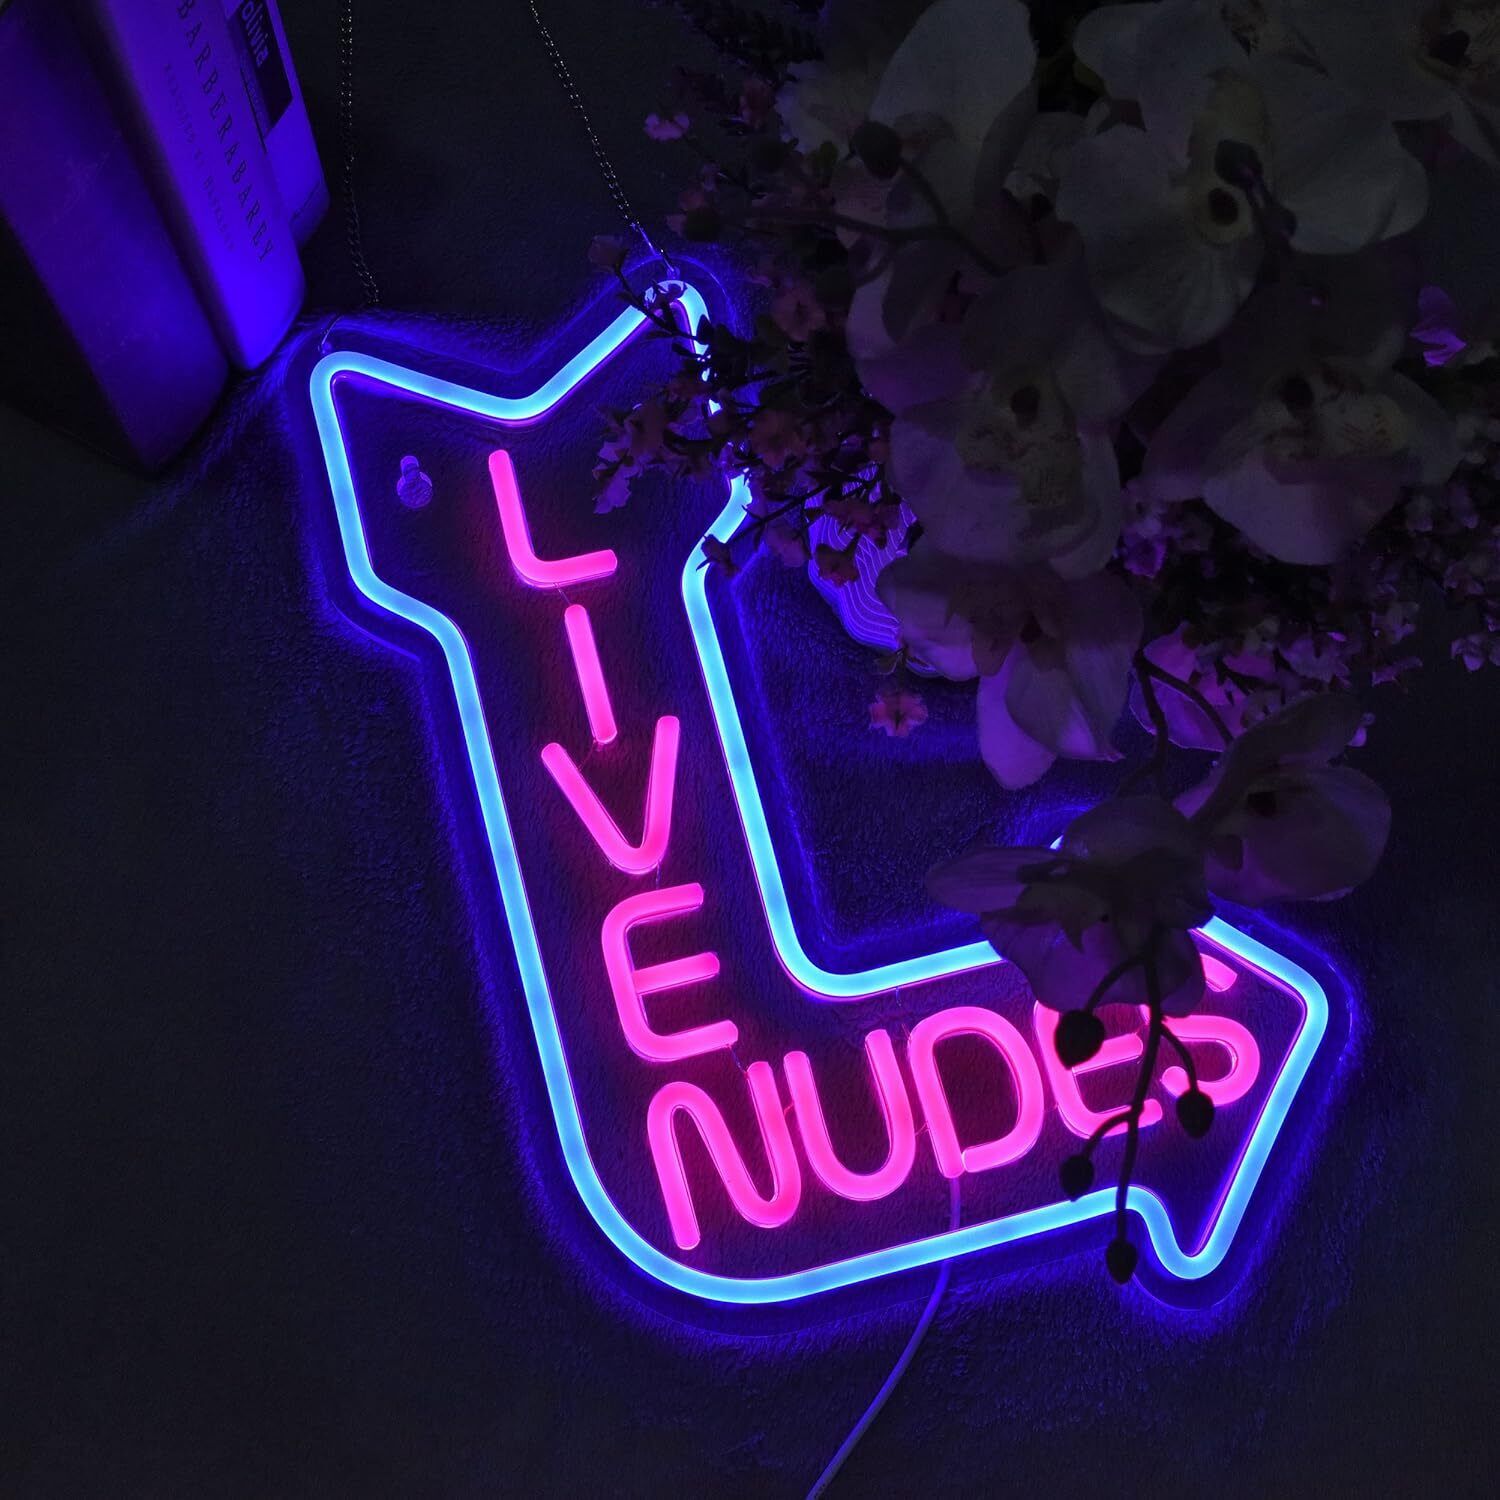 Live Nudes Neon Sign For Wall Decor Man Cave Bar Hotel Pub USB Power With Dimmer